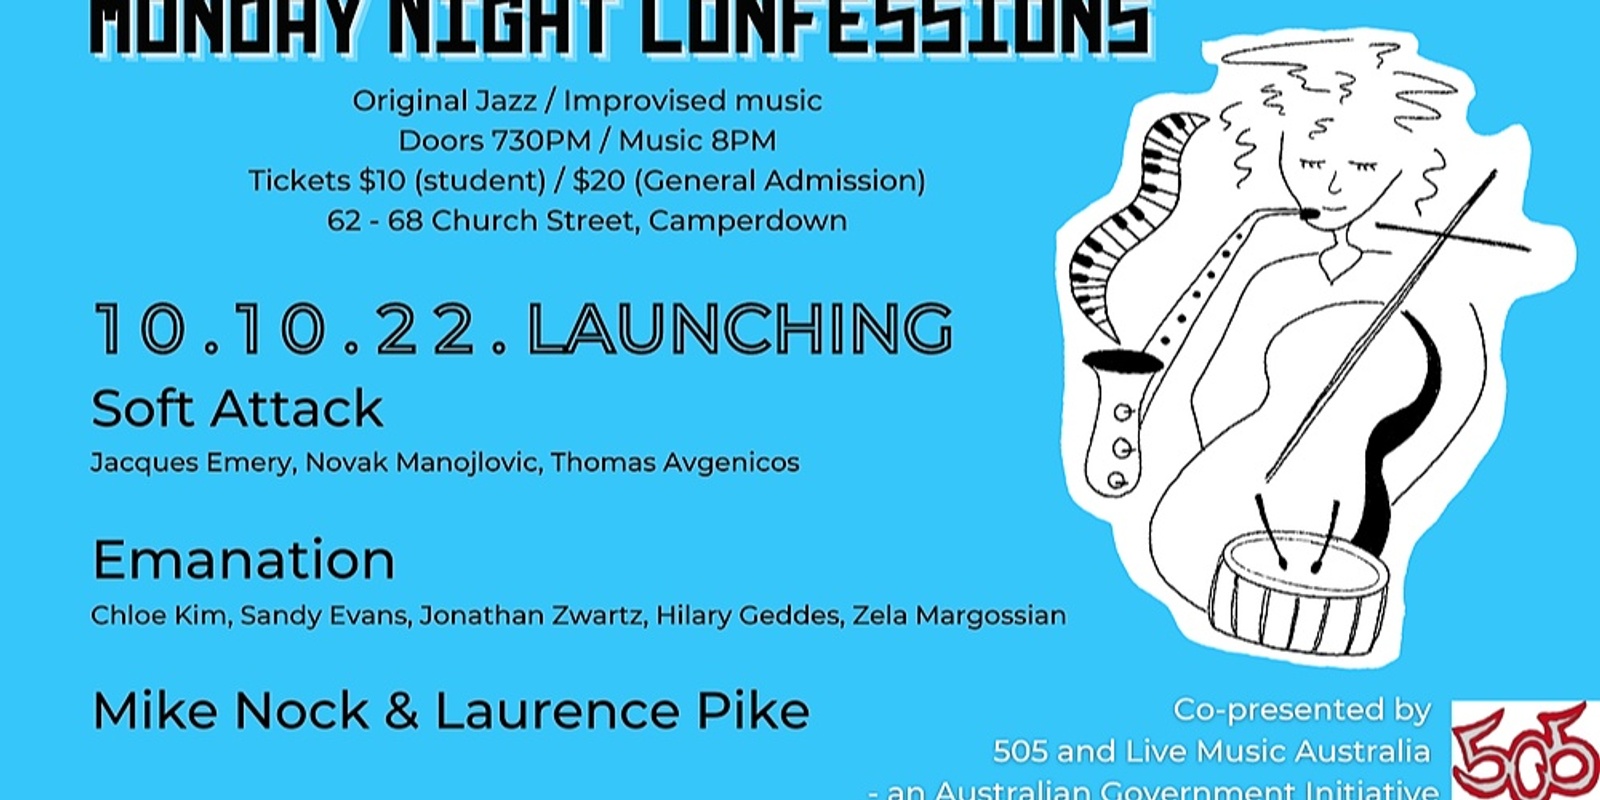 Banner image for Monday Night Confessions - OPENING NIGHT w/ Mike Nock + Laurence Pike, Emanations, Soft Attack 